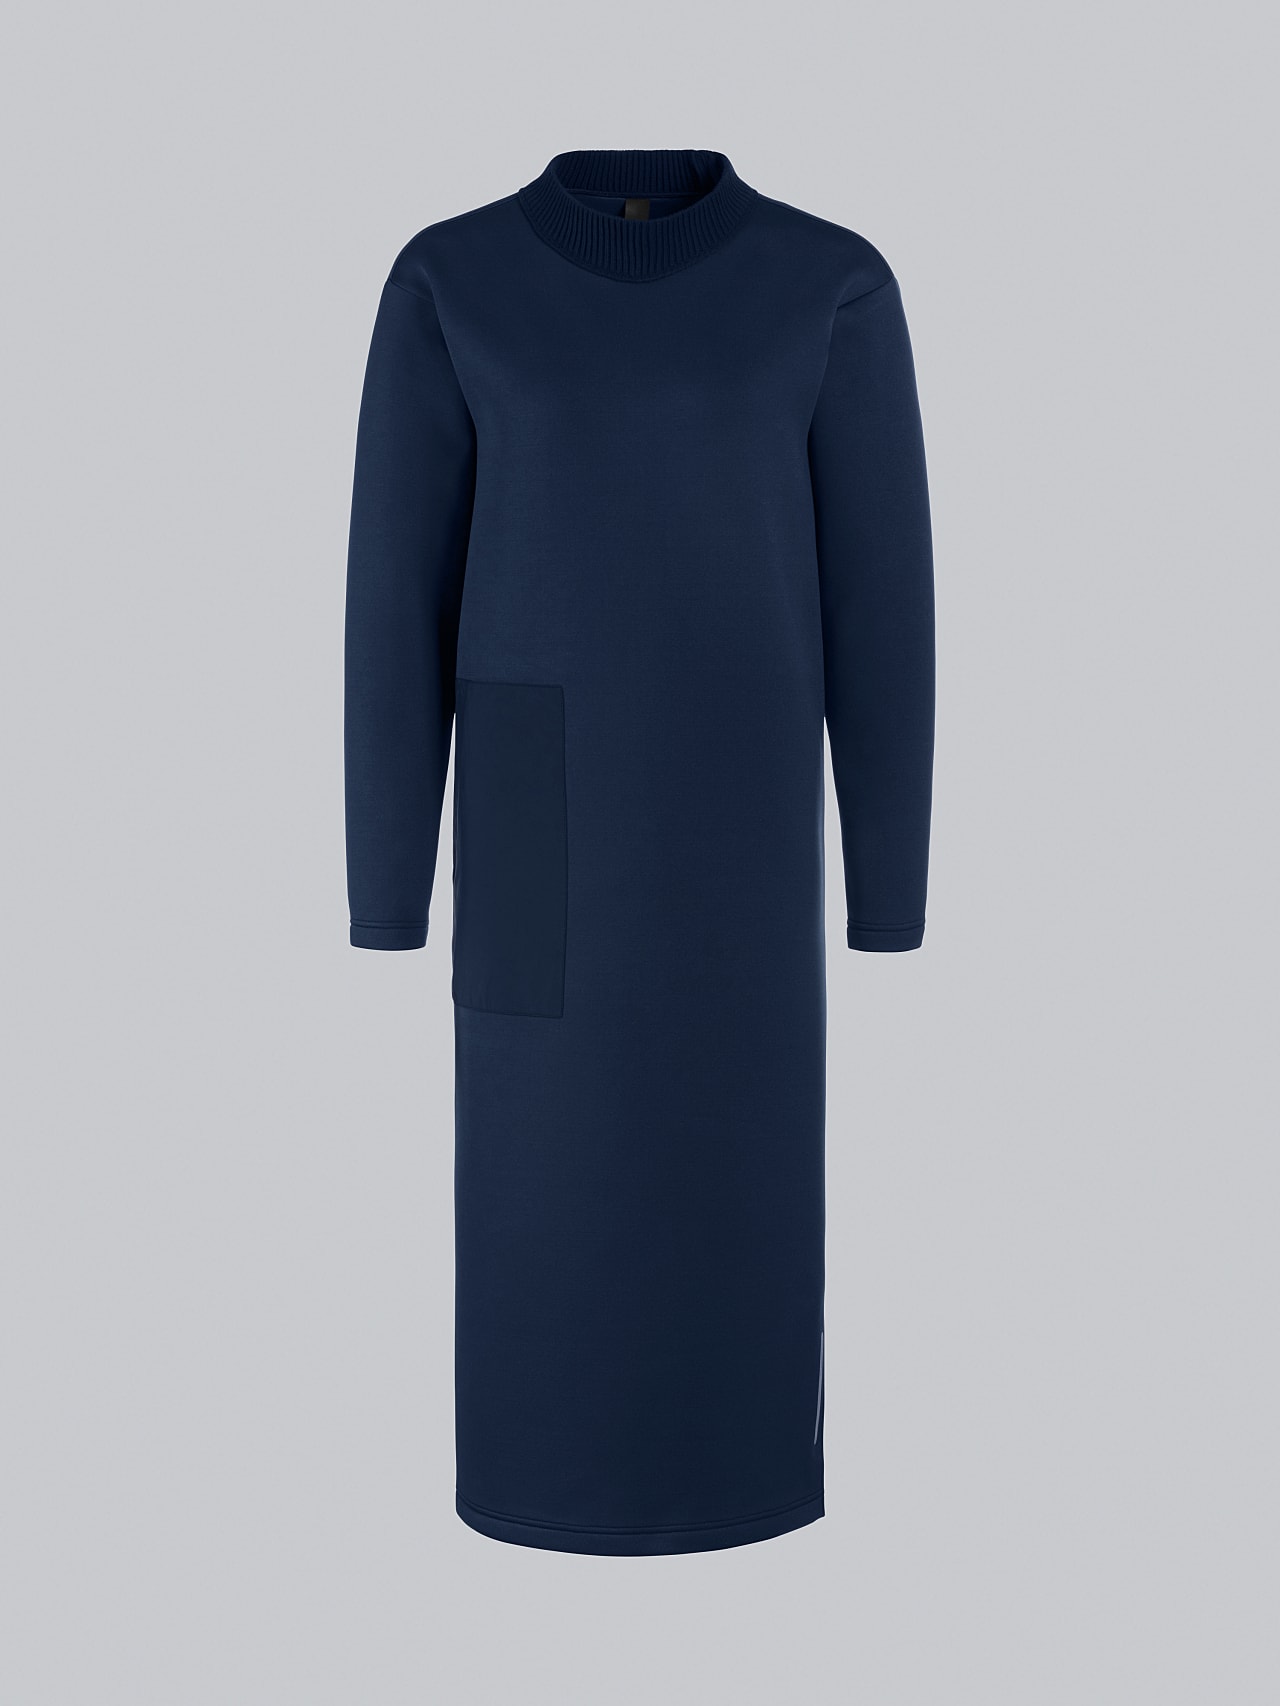 AlphaTauri | SINLE V1.Y5.02 | Technical Spacer Maxi Dress in navy for Women